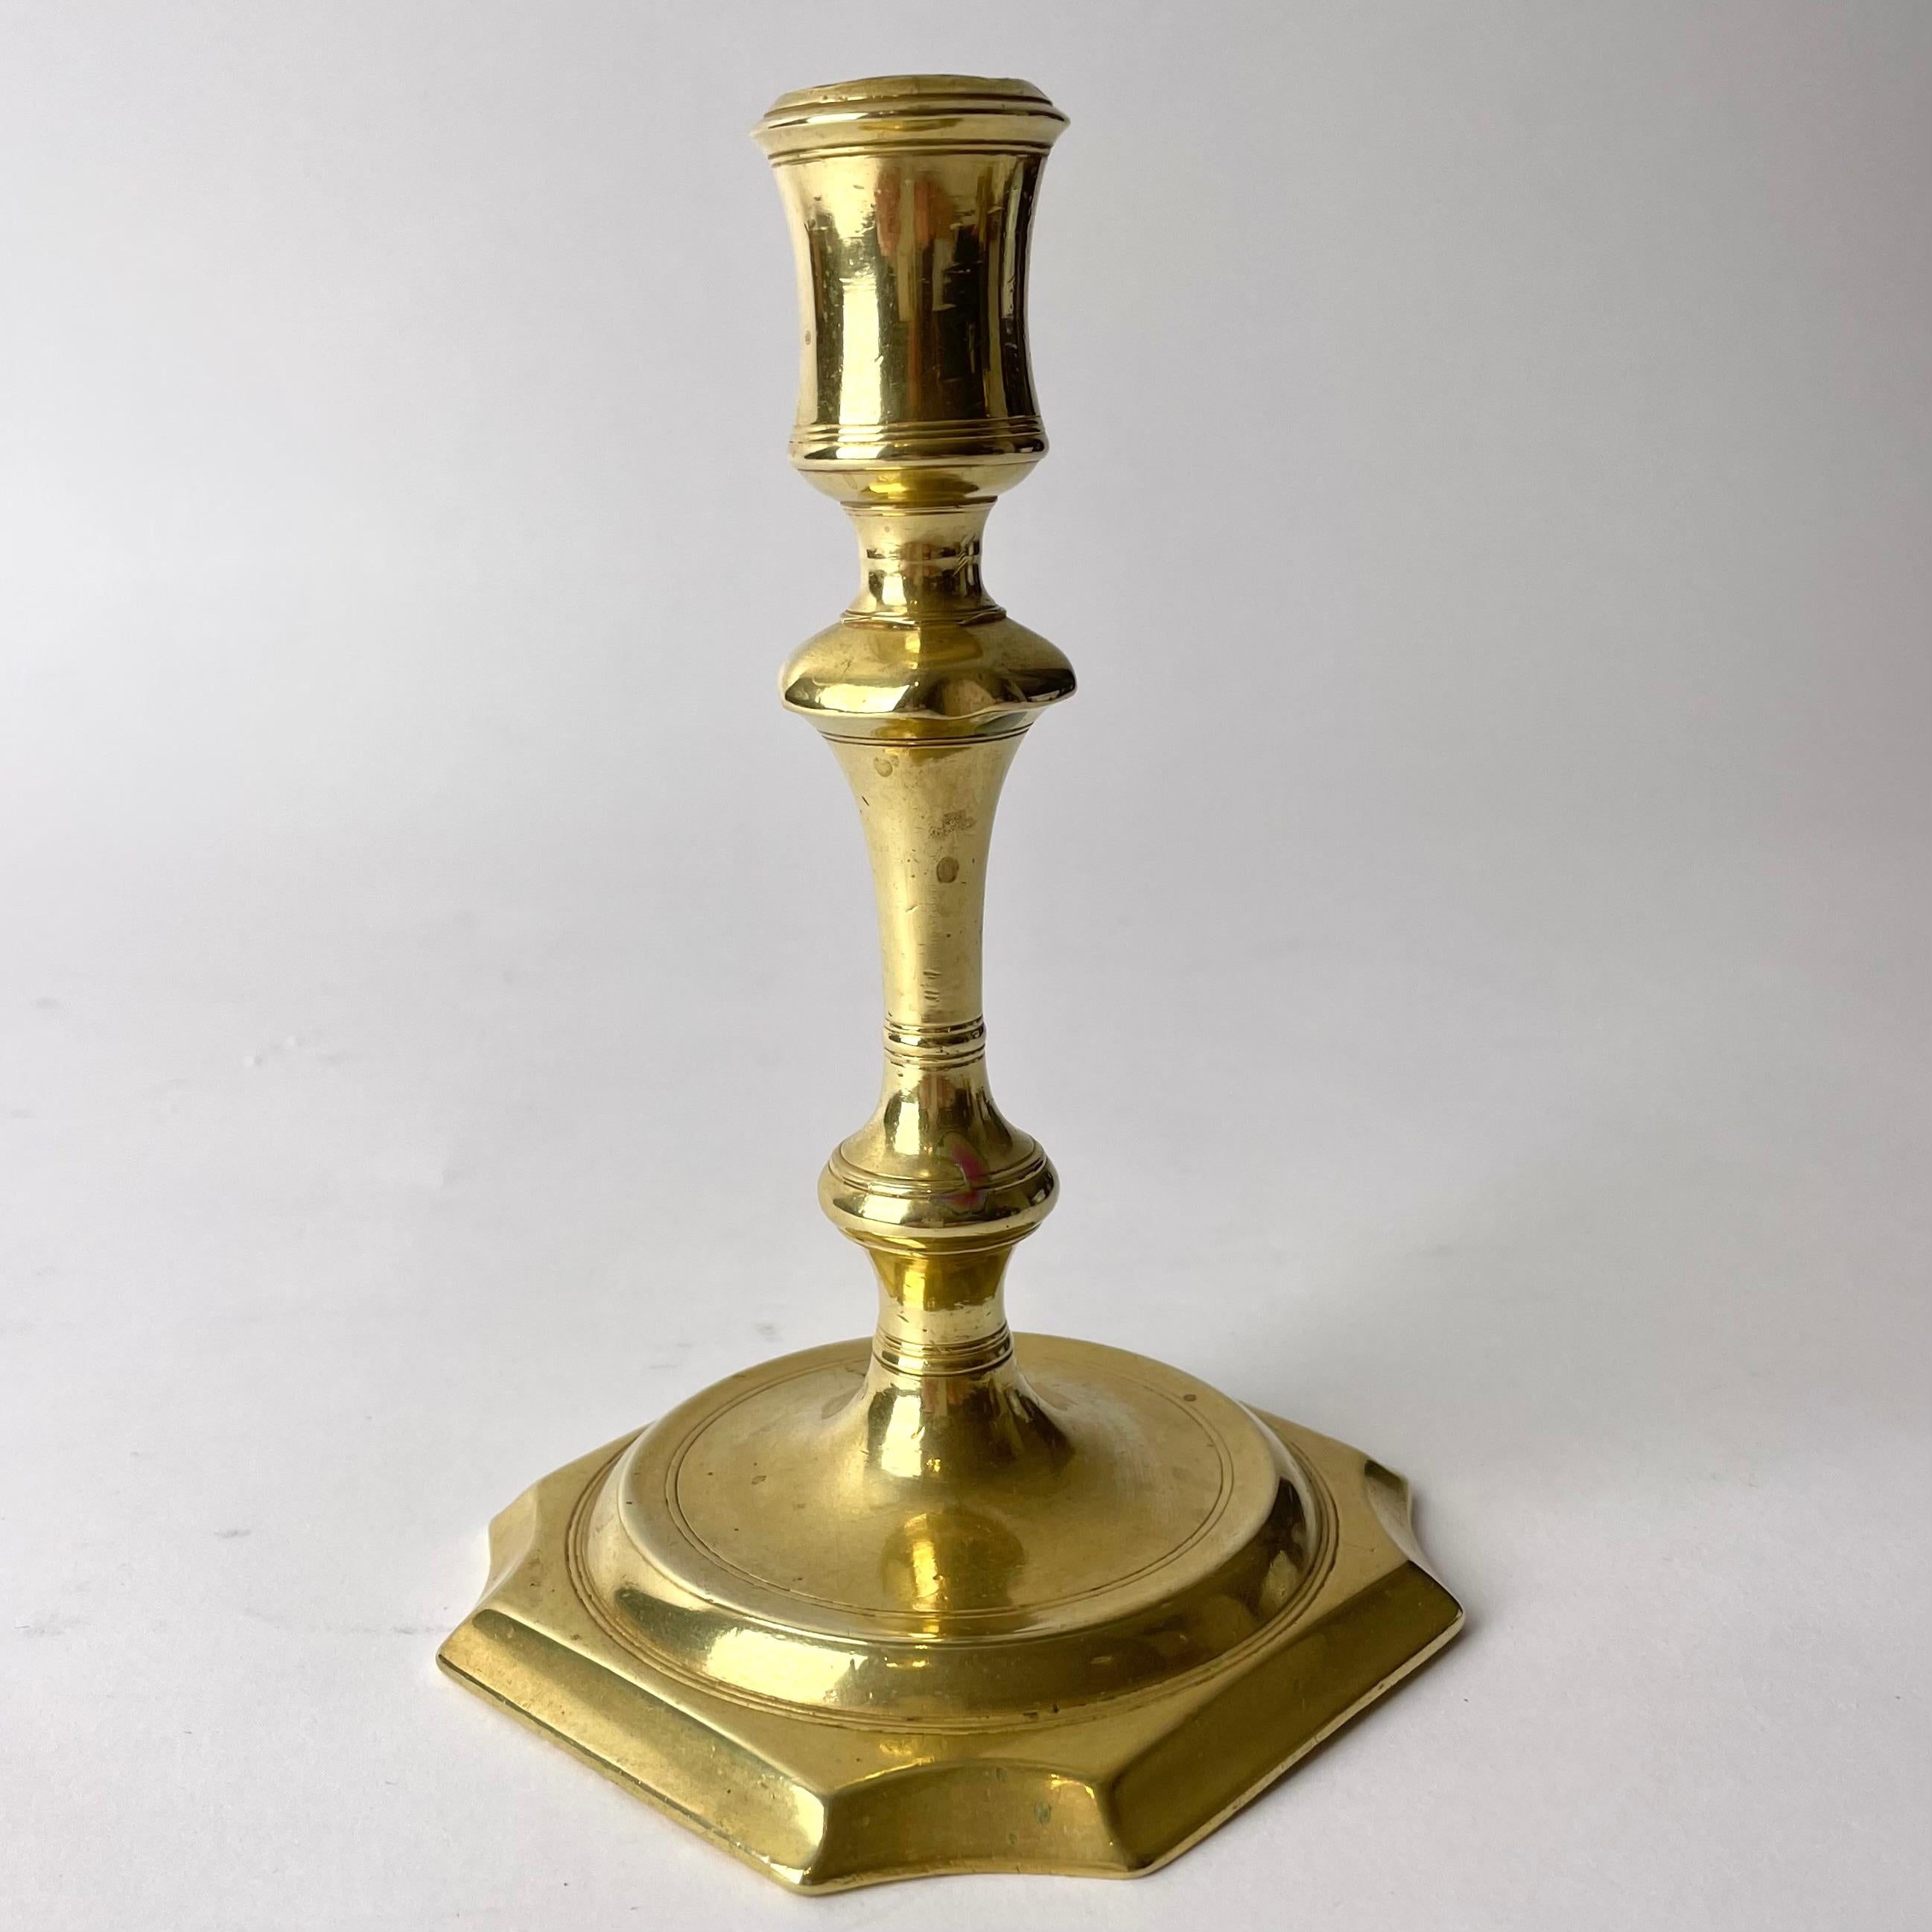 A Brass Candlestick in Swedish Baroque, early 18th Century For Sale 1